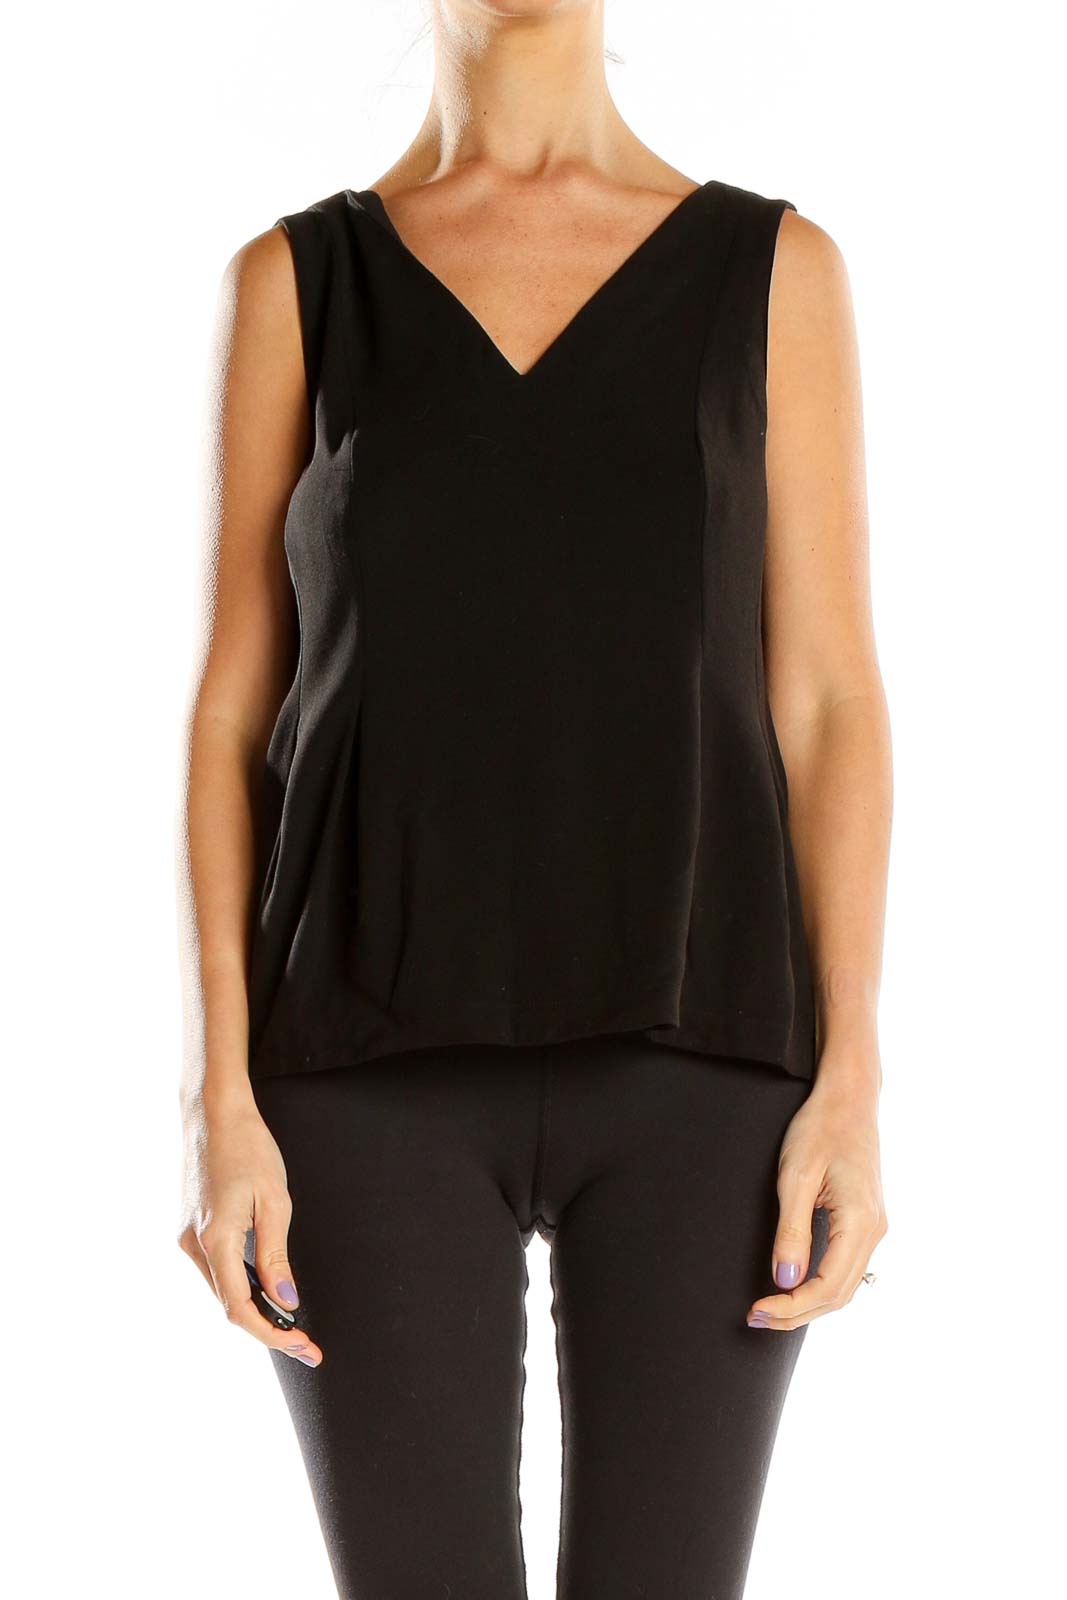 Black Chic Top Front